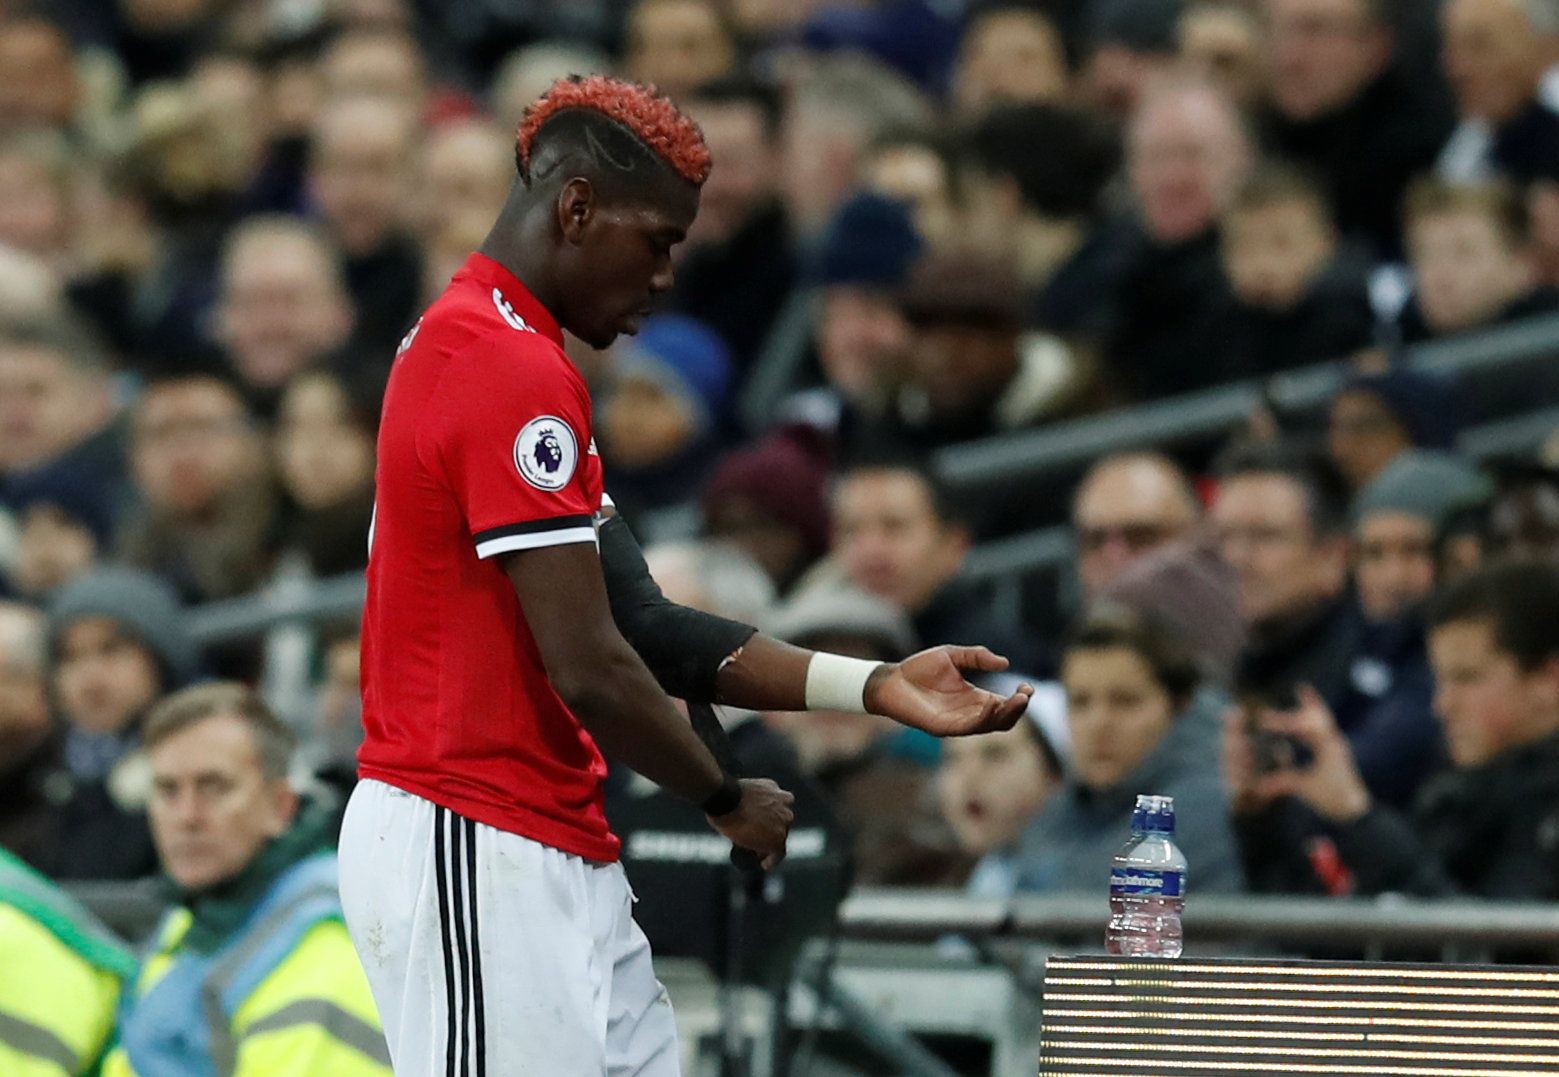 Paul Pogba is subbed off by Jose Mourinho